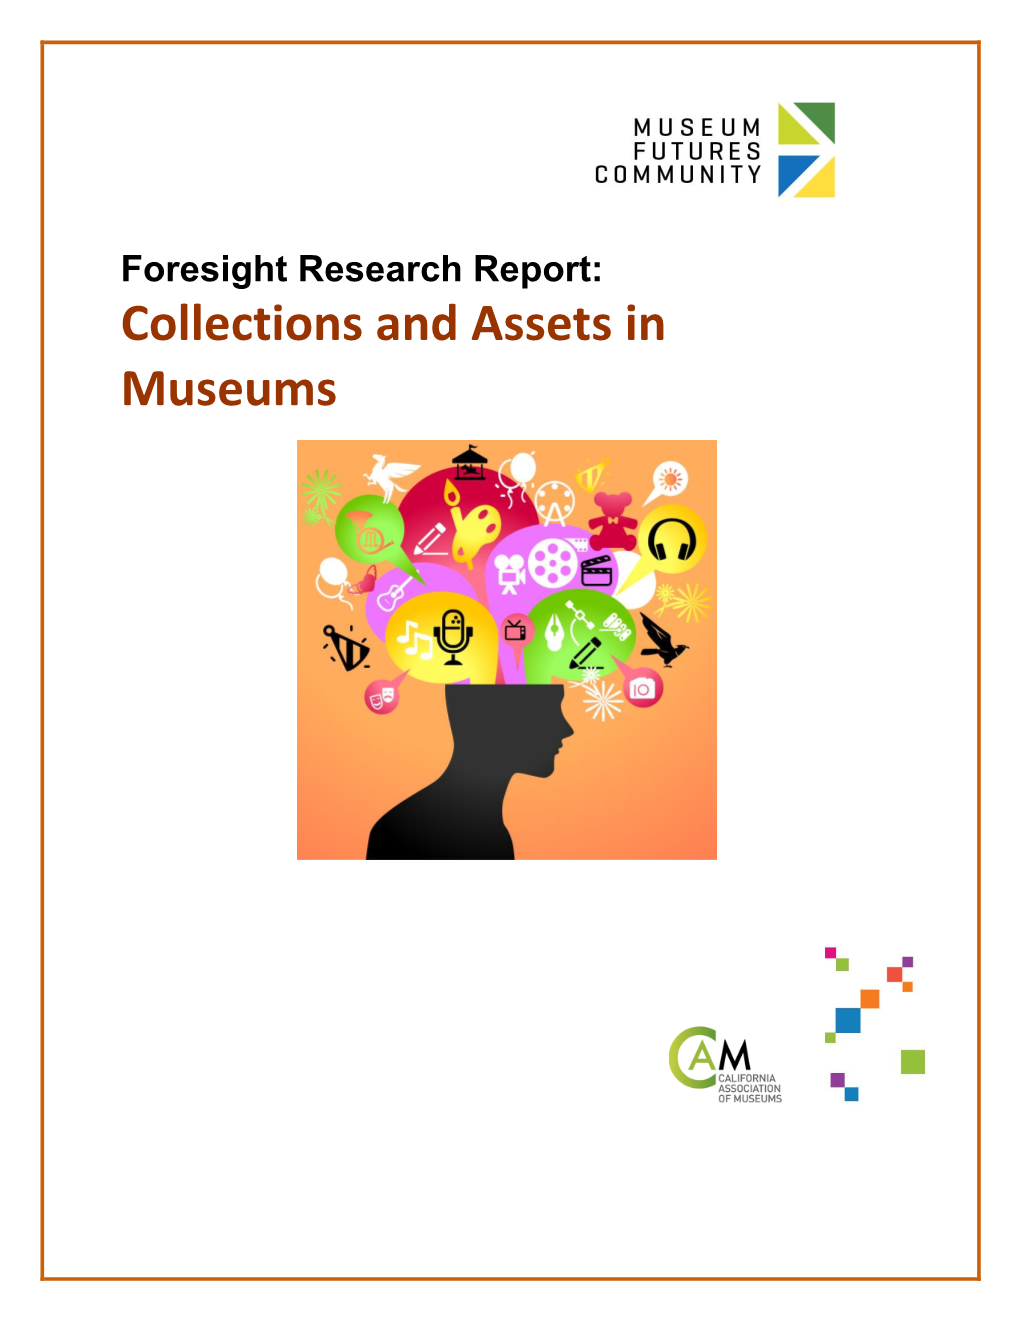 Collections and Assets in Museums